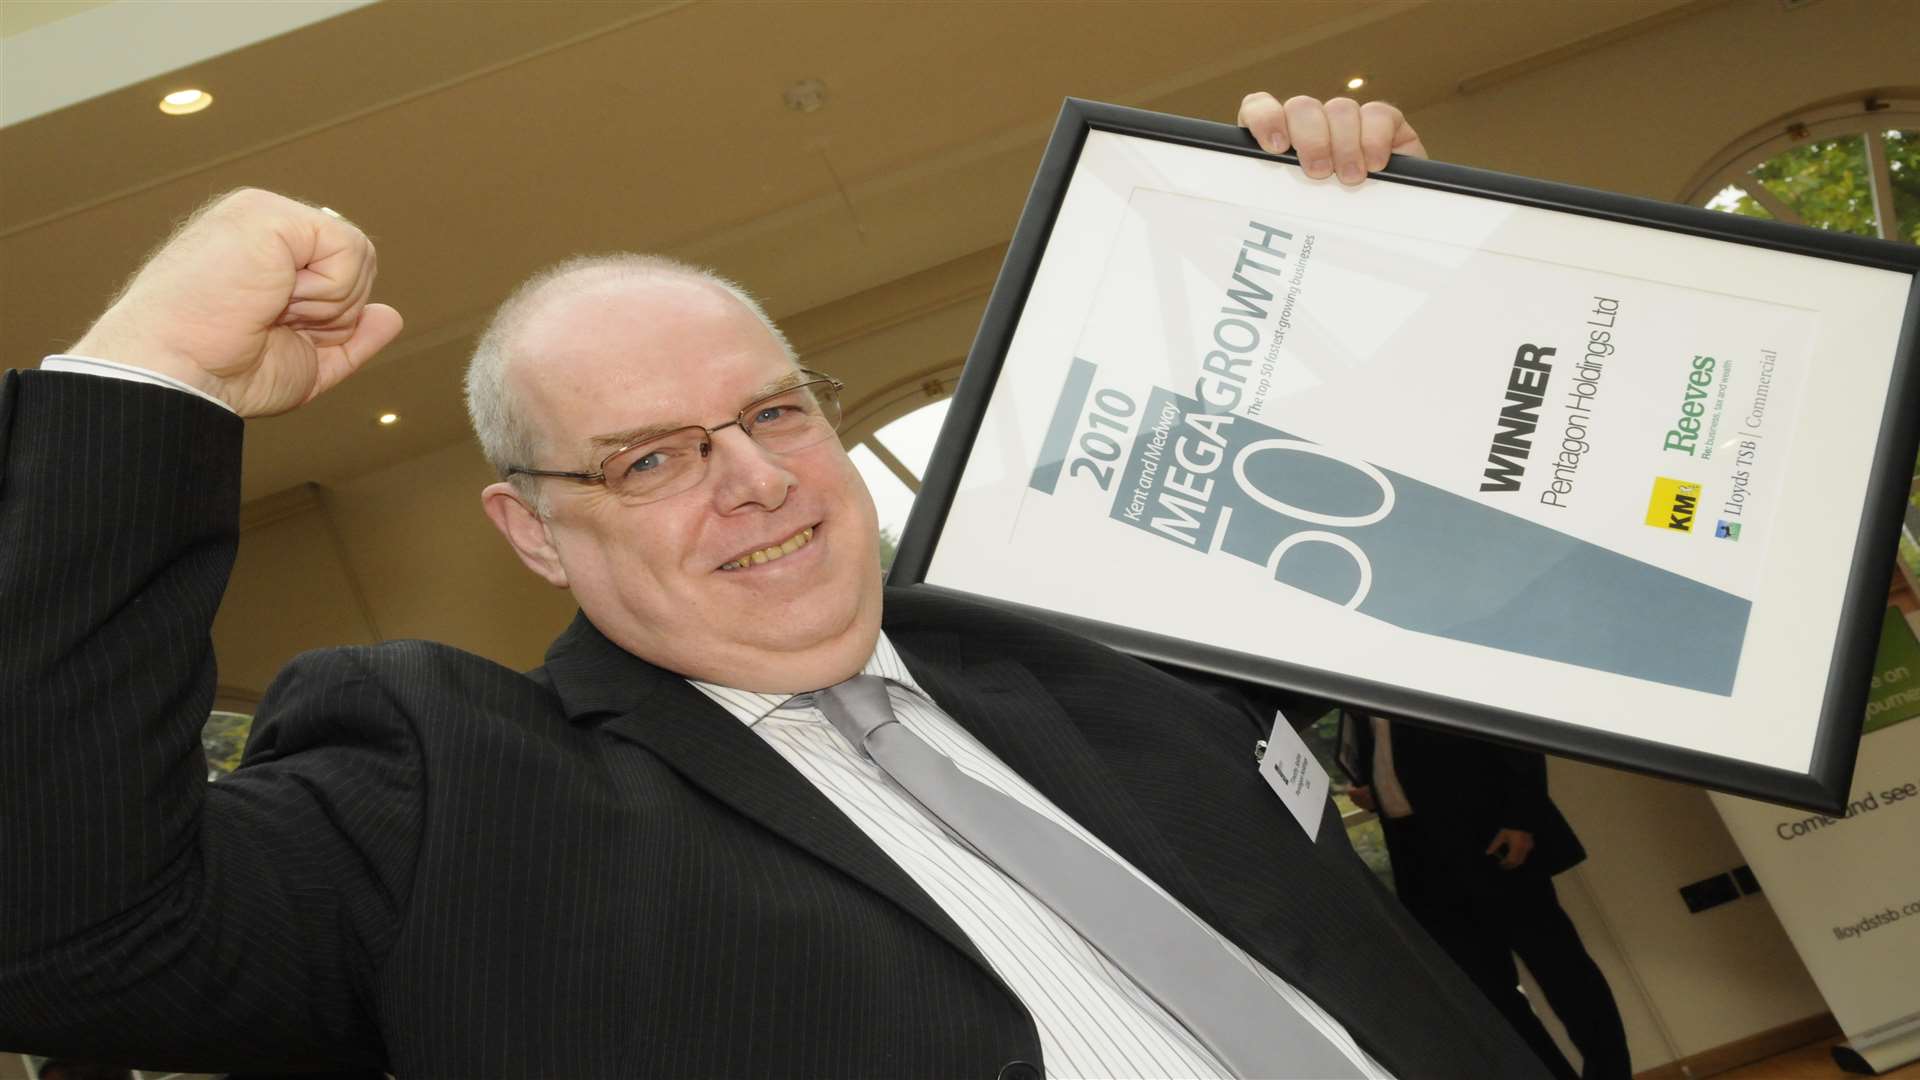 At the 2010 ceremony, Timothy Spittle celebrates for Pentagon Holdings